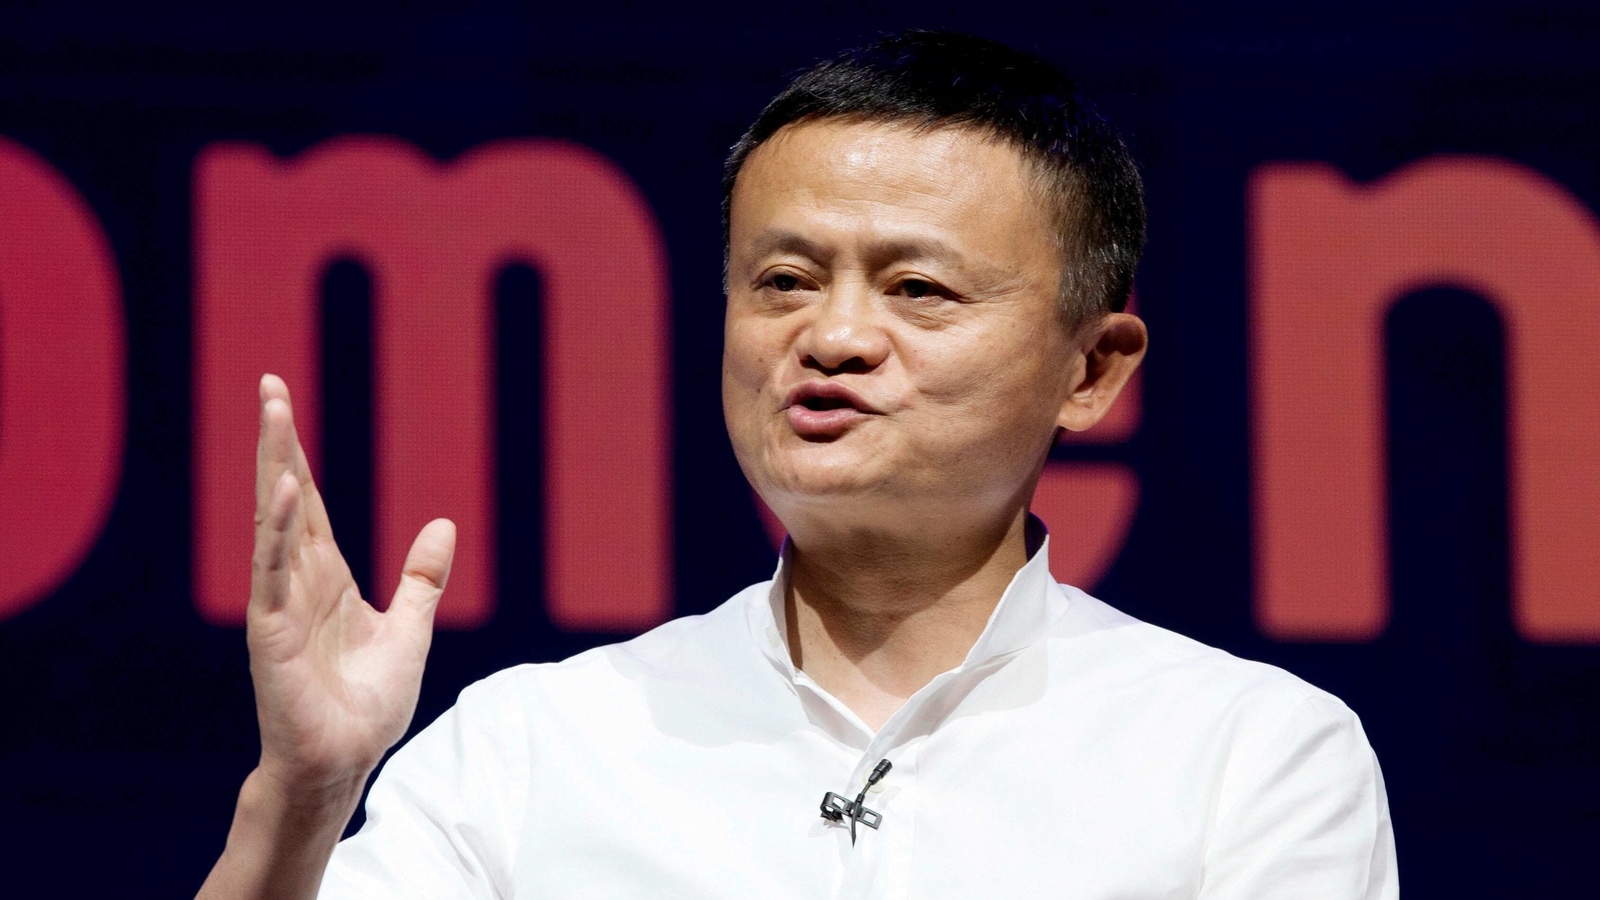 jack ma loses title as china's richest man after coming under beijing's scrutiny | world news - hindustan times